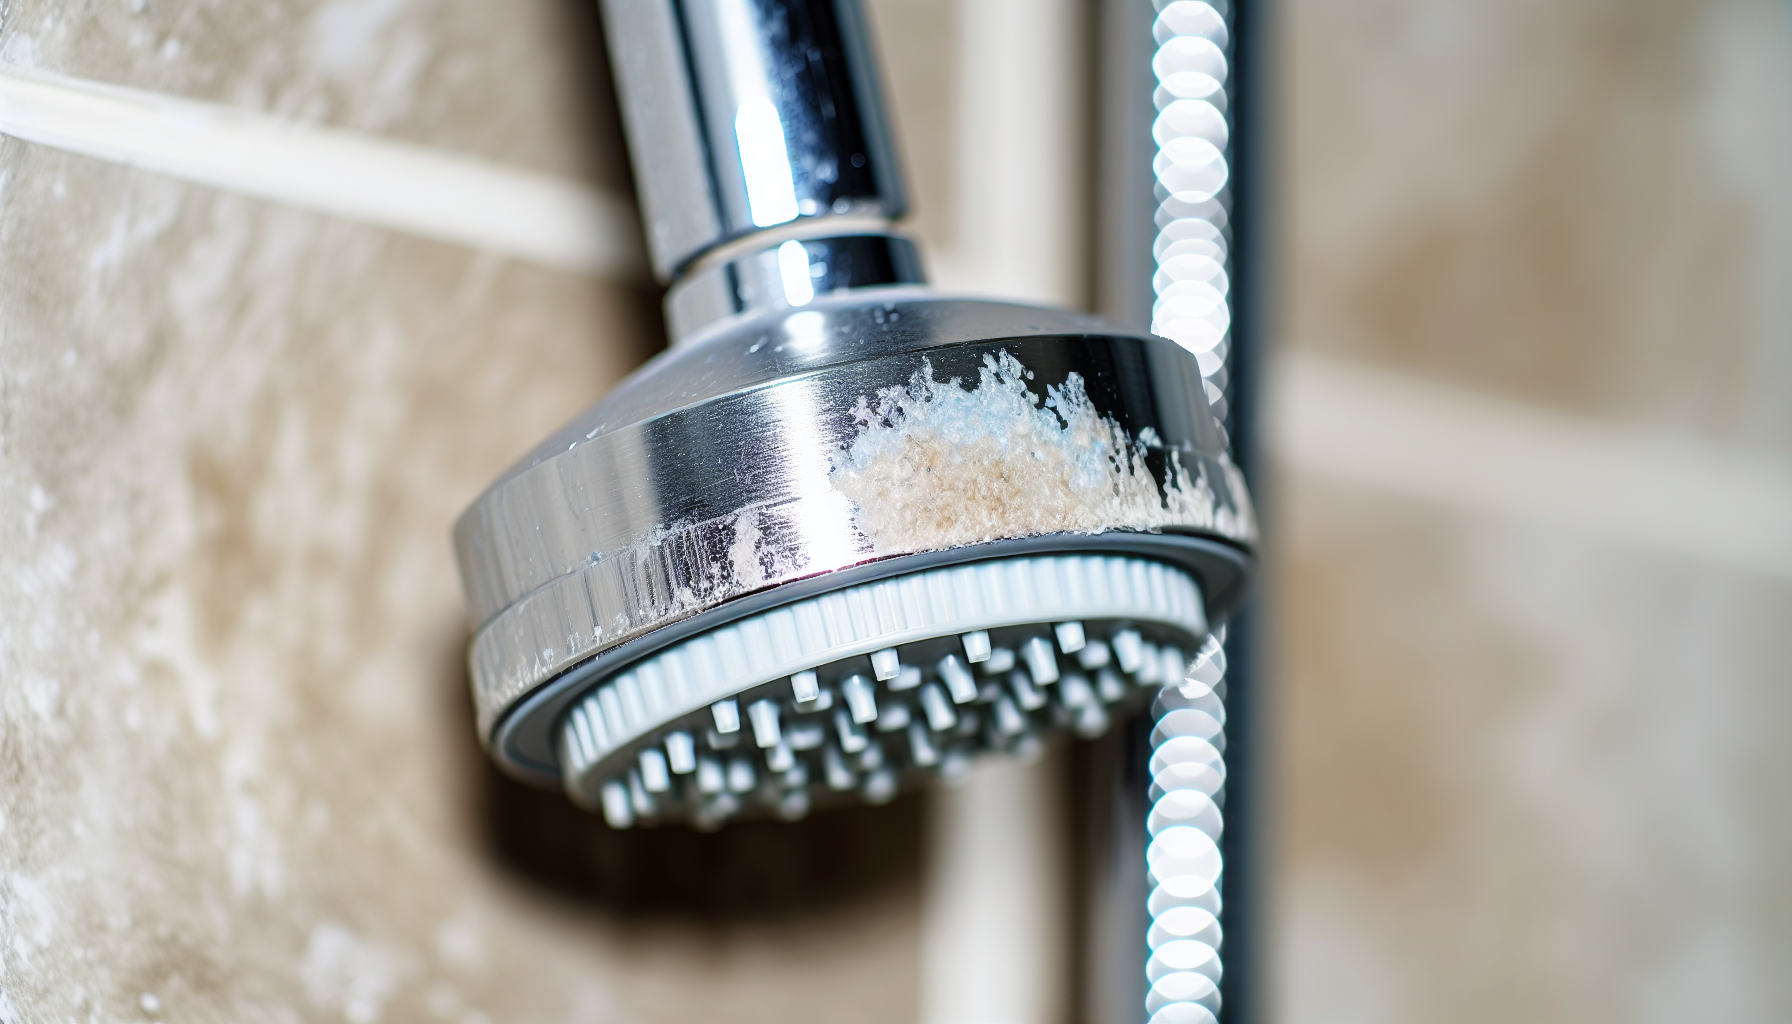 Shower head with mineral deposits